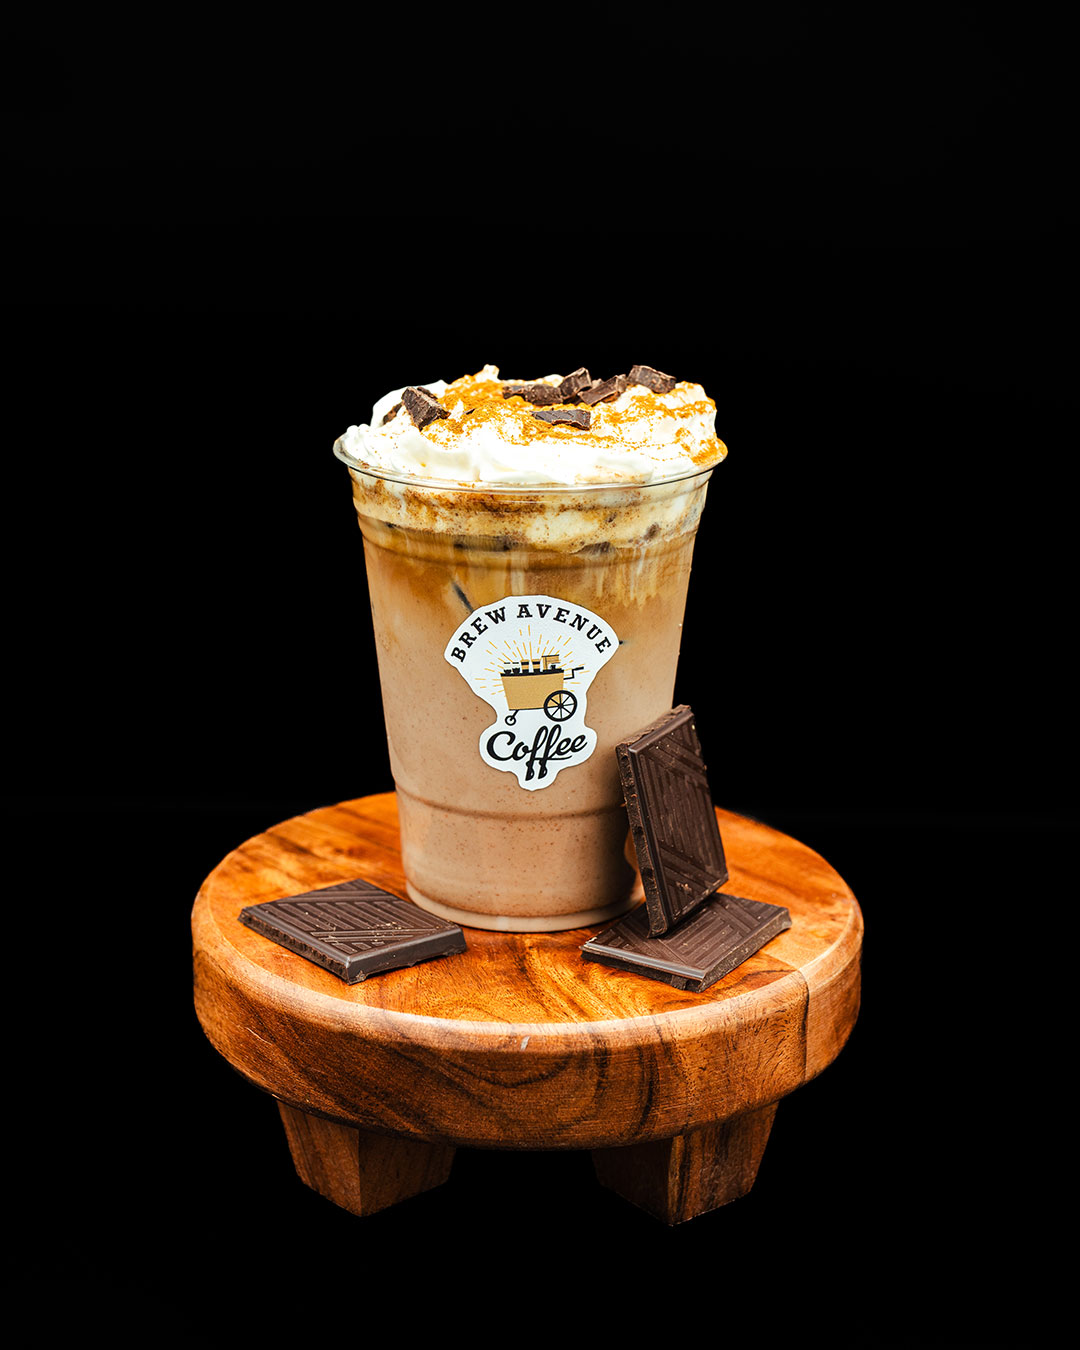 A clear cup with a sticker showing the Brew Avenue Coffee logo is on a wooden stool against a black studio background. The cup is filled with cafe mocha with cream and chocolate shavings on top. Chocolate squares are also on the stool.